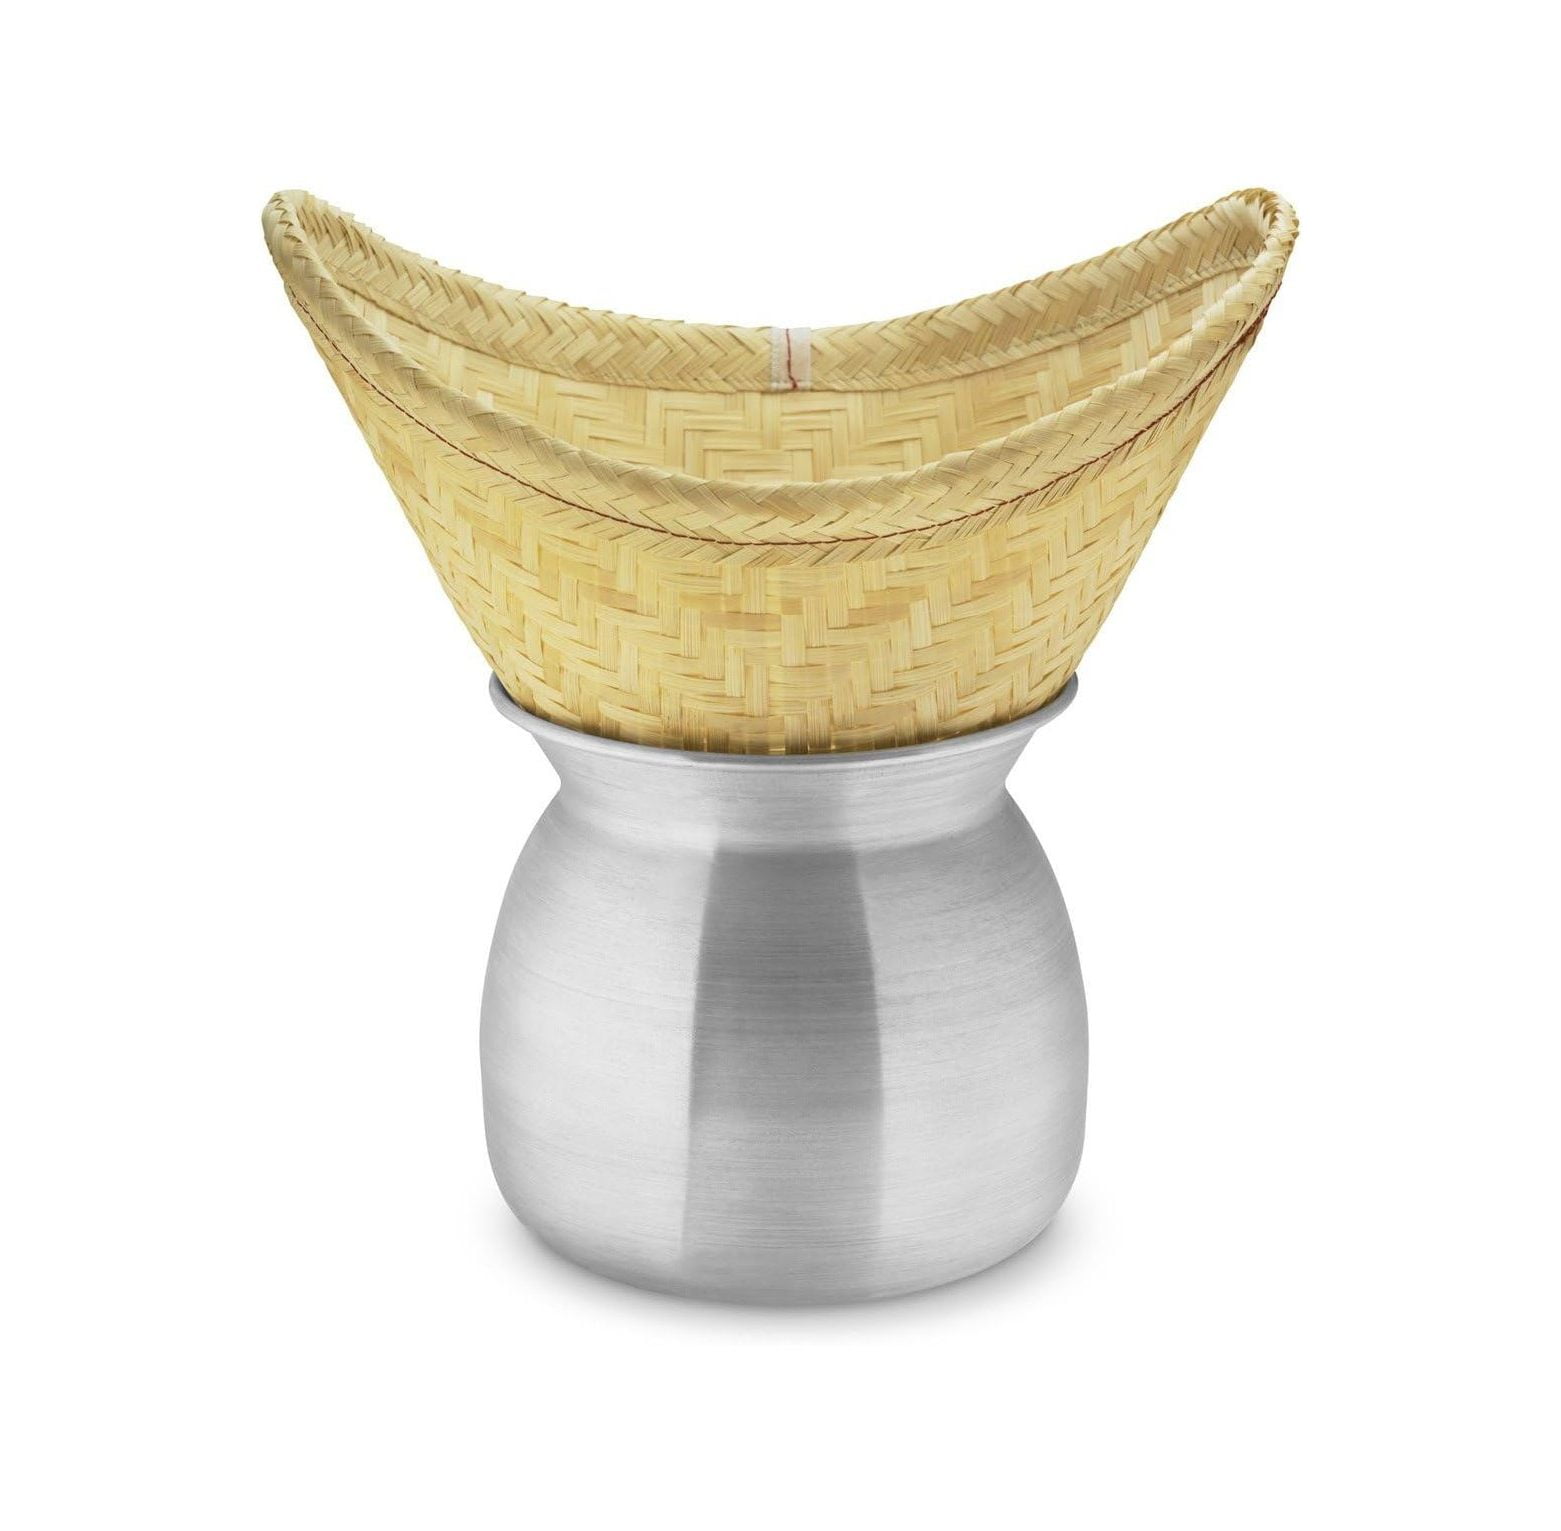 Sticky Rice Steamer Basket, Imported from Thailand » Temple of Thai